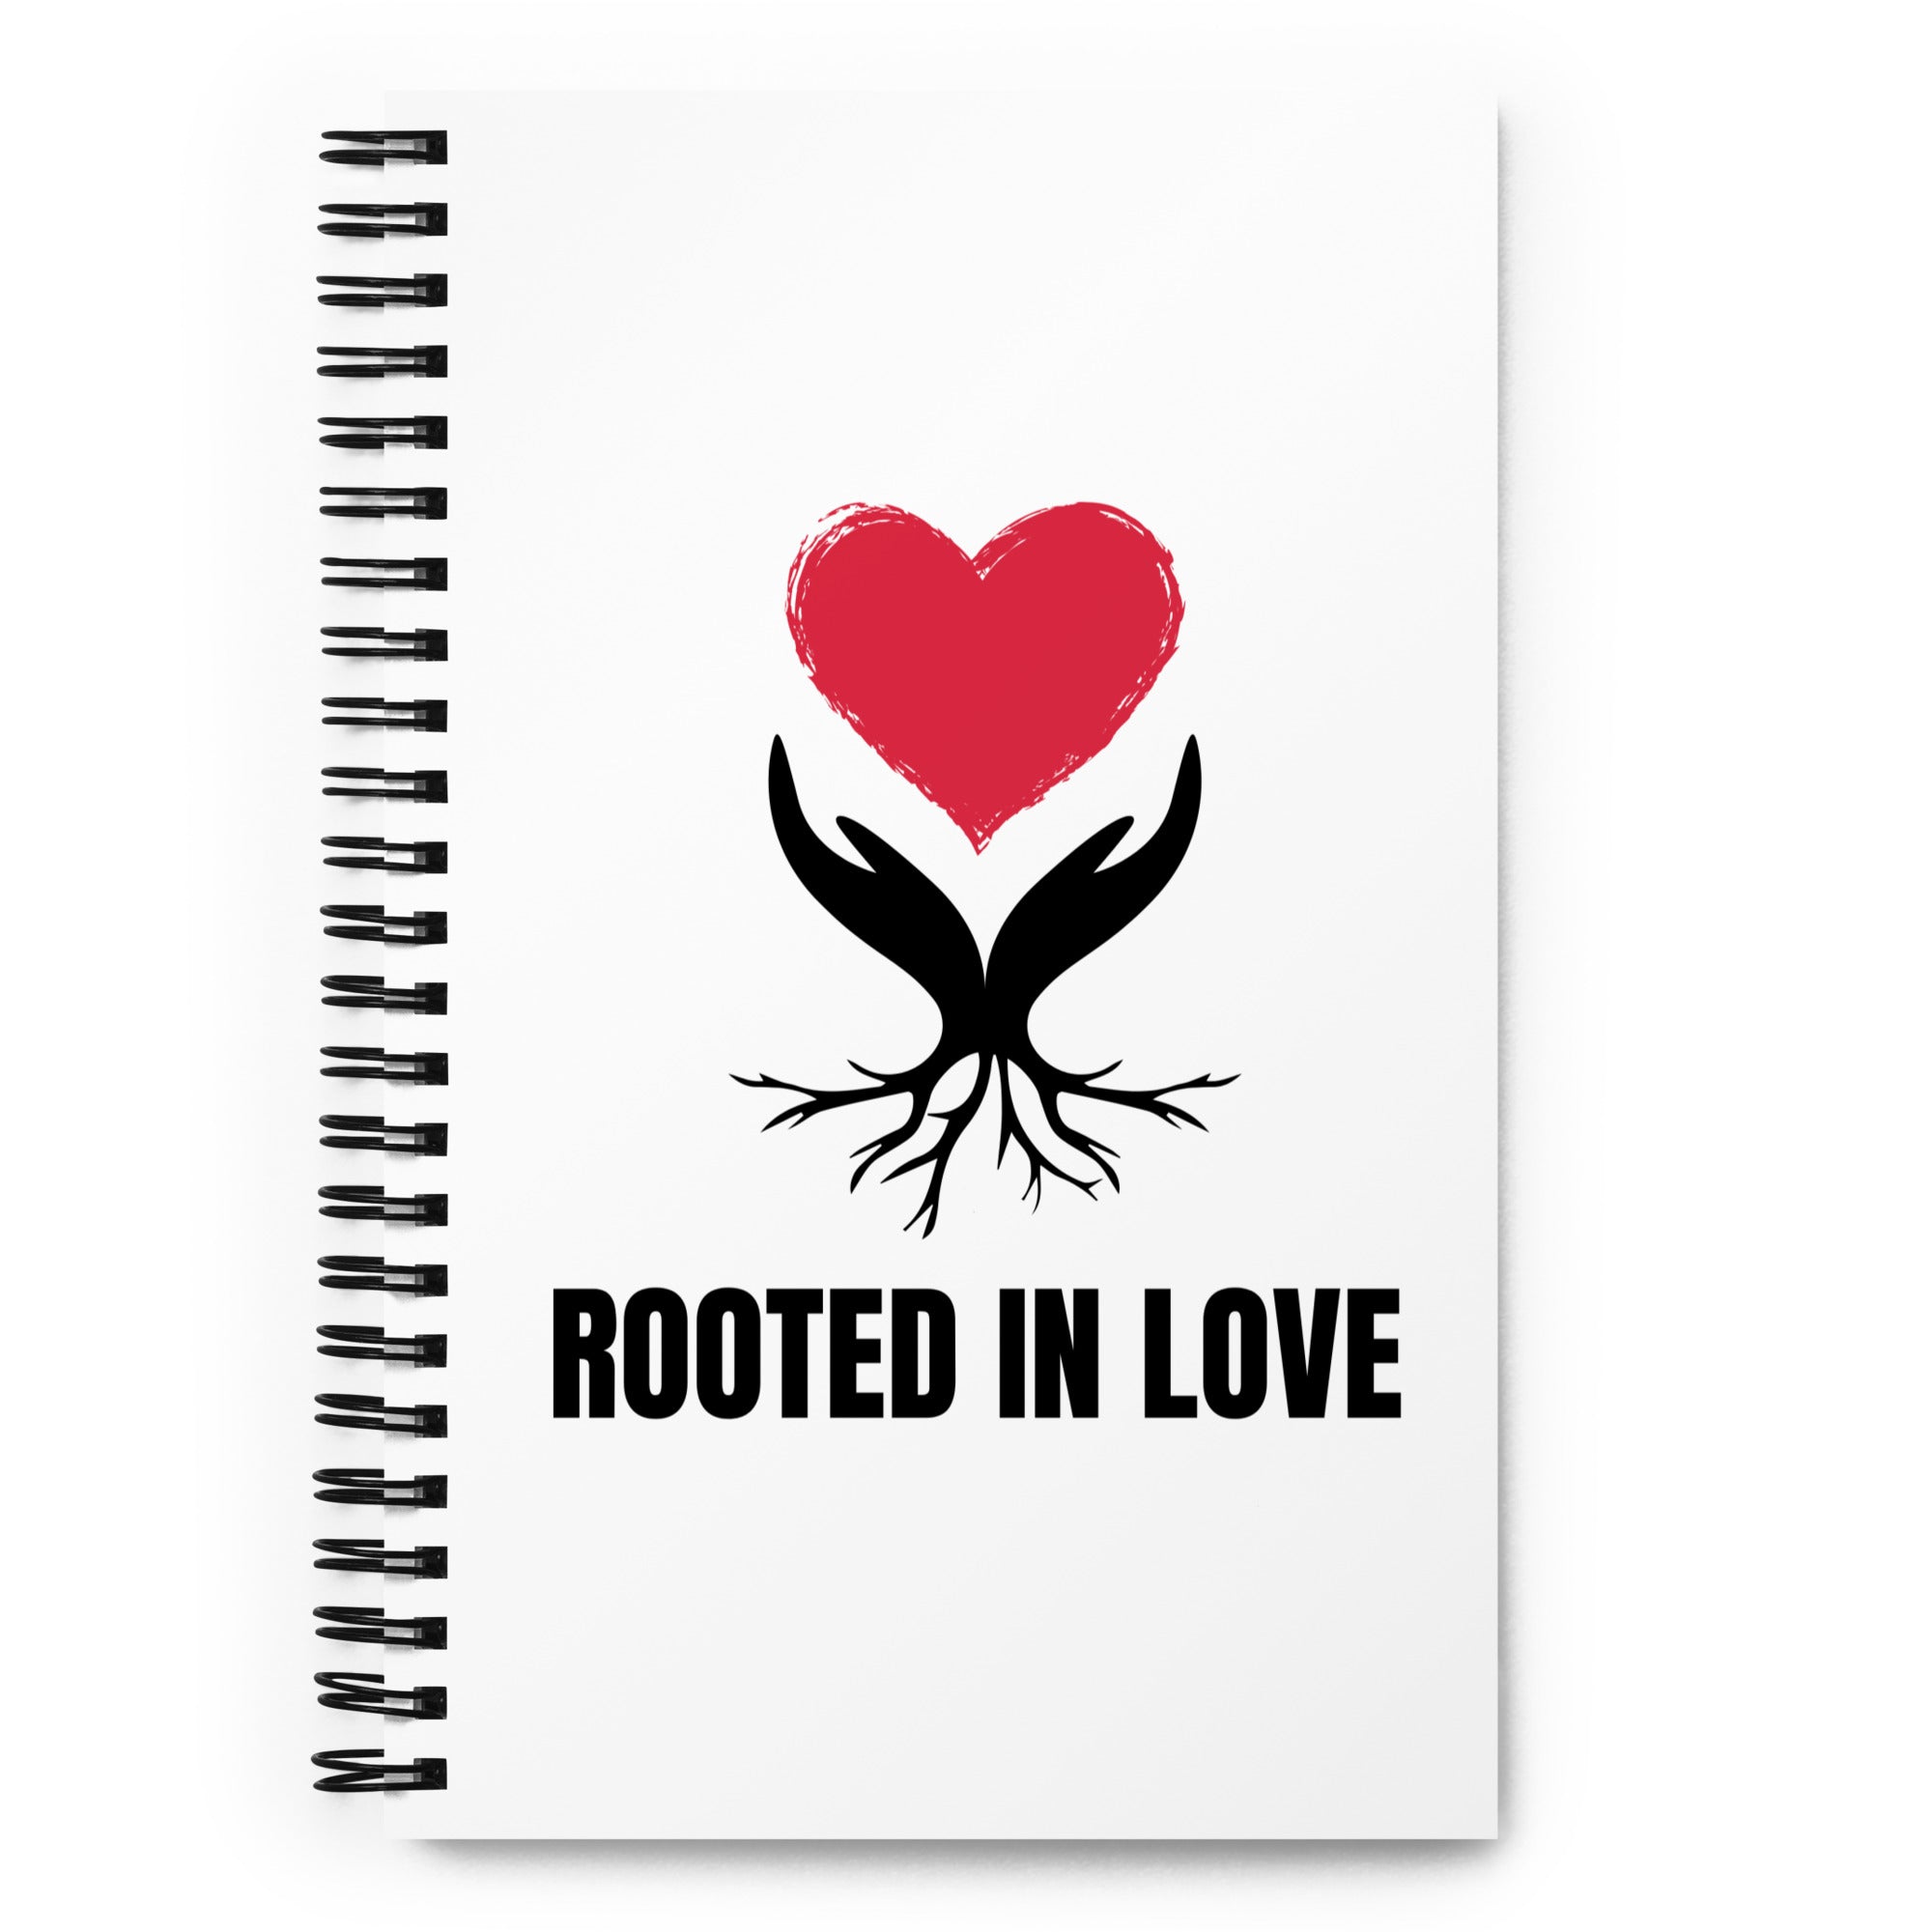 Rooted In Love Spiral notebook